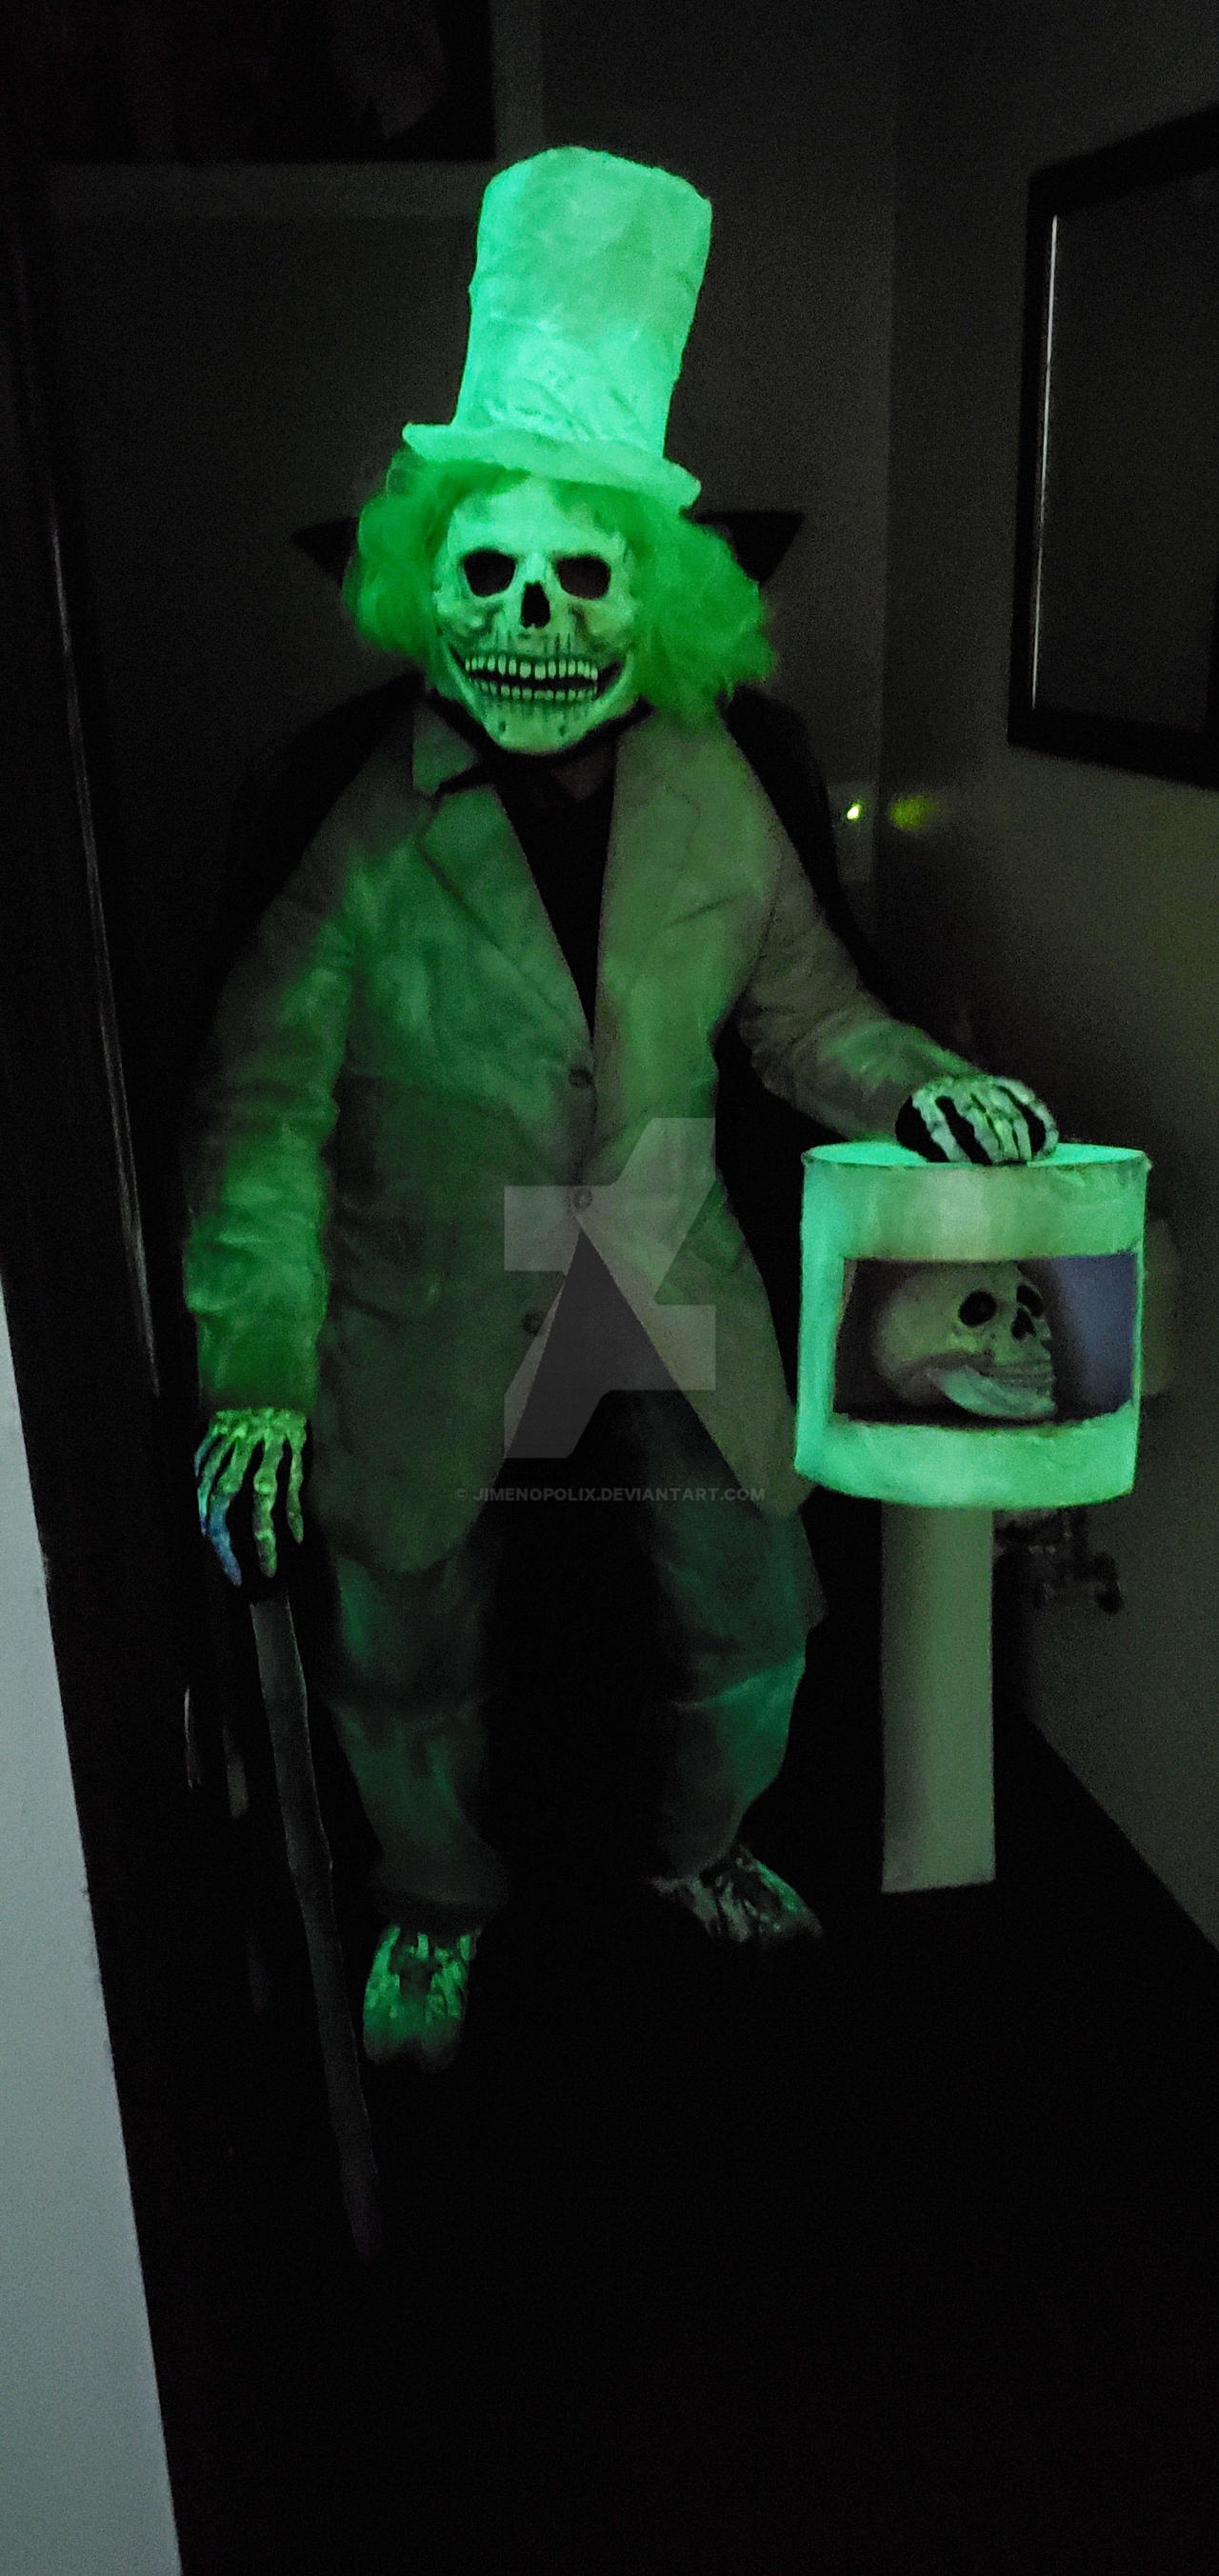 My Hatbox Ghost costume from this past Halloween. The hatbox